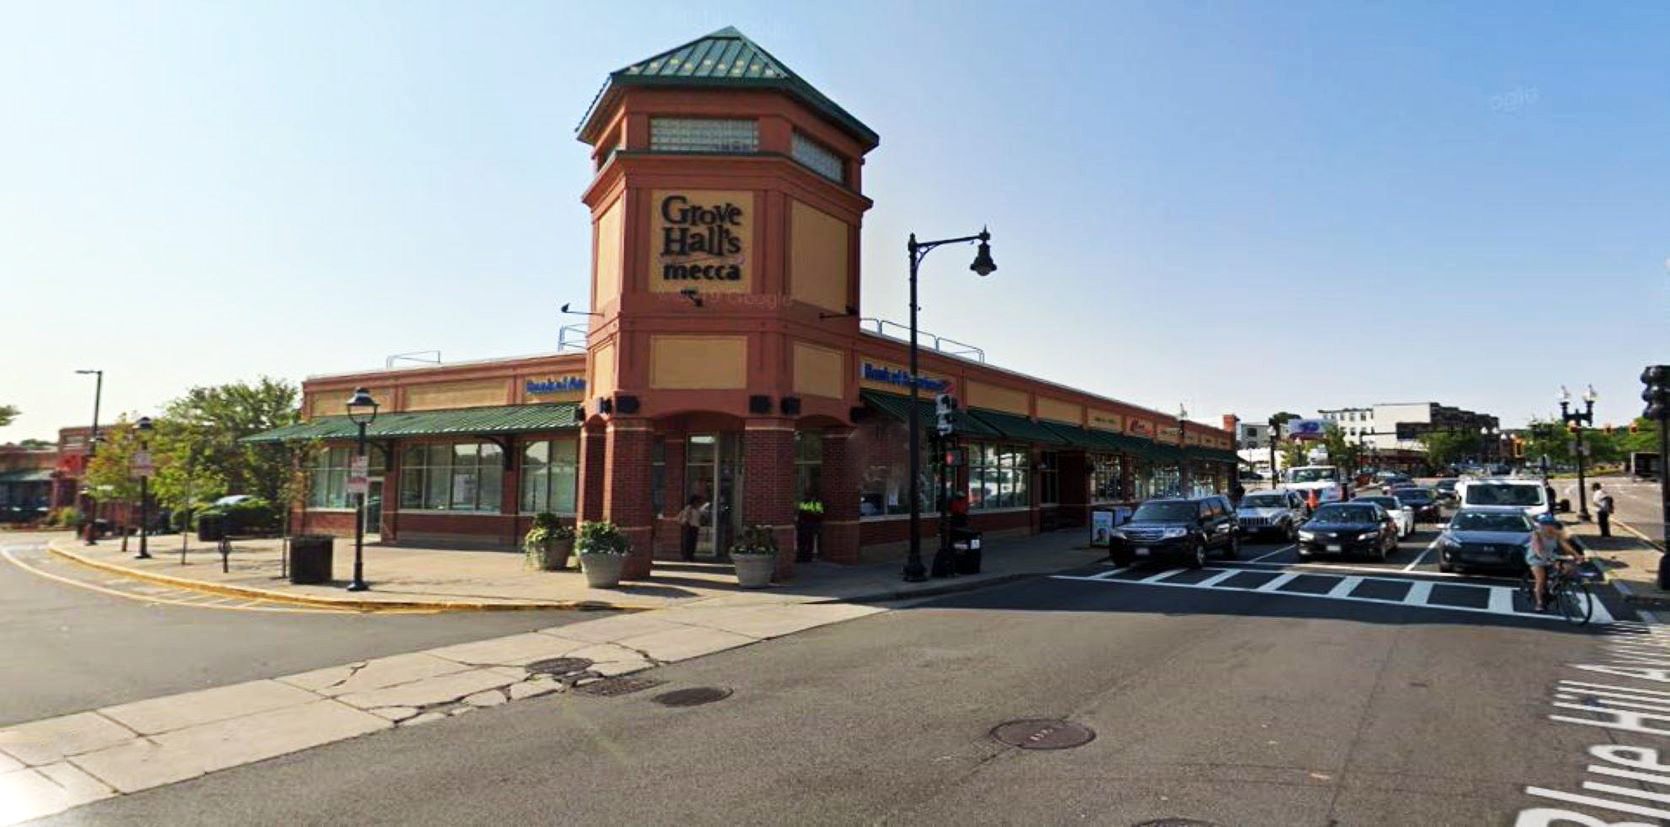 Bank of America financial center with walk-up ATM | 470 Blue Hill Ave, Dorchester, MA 02121